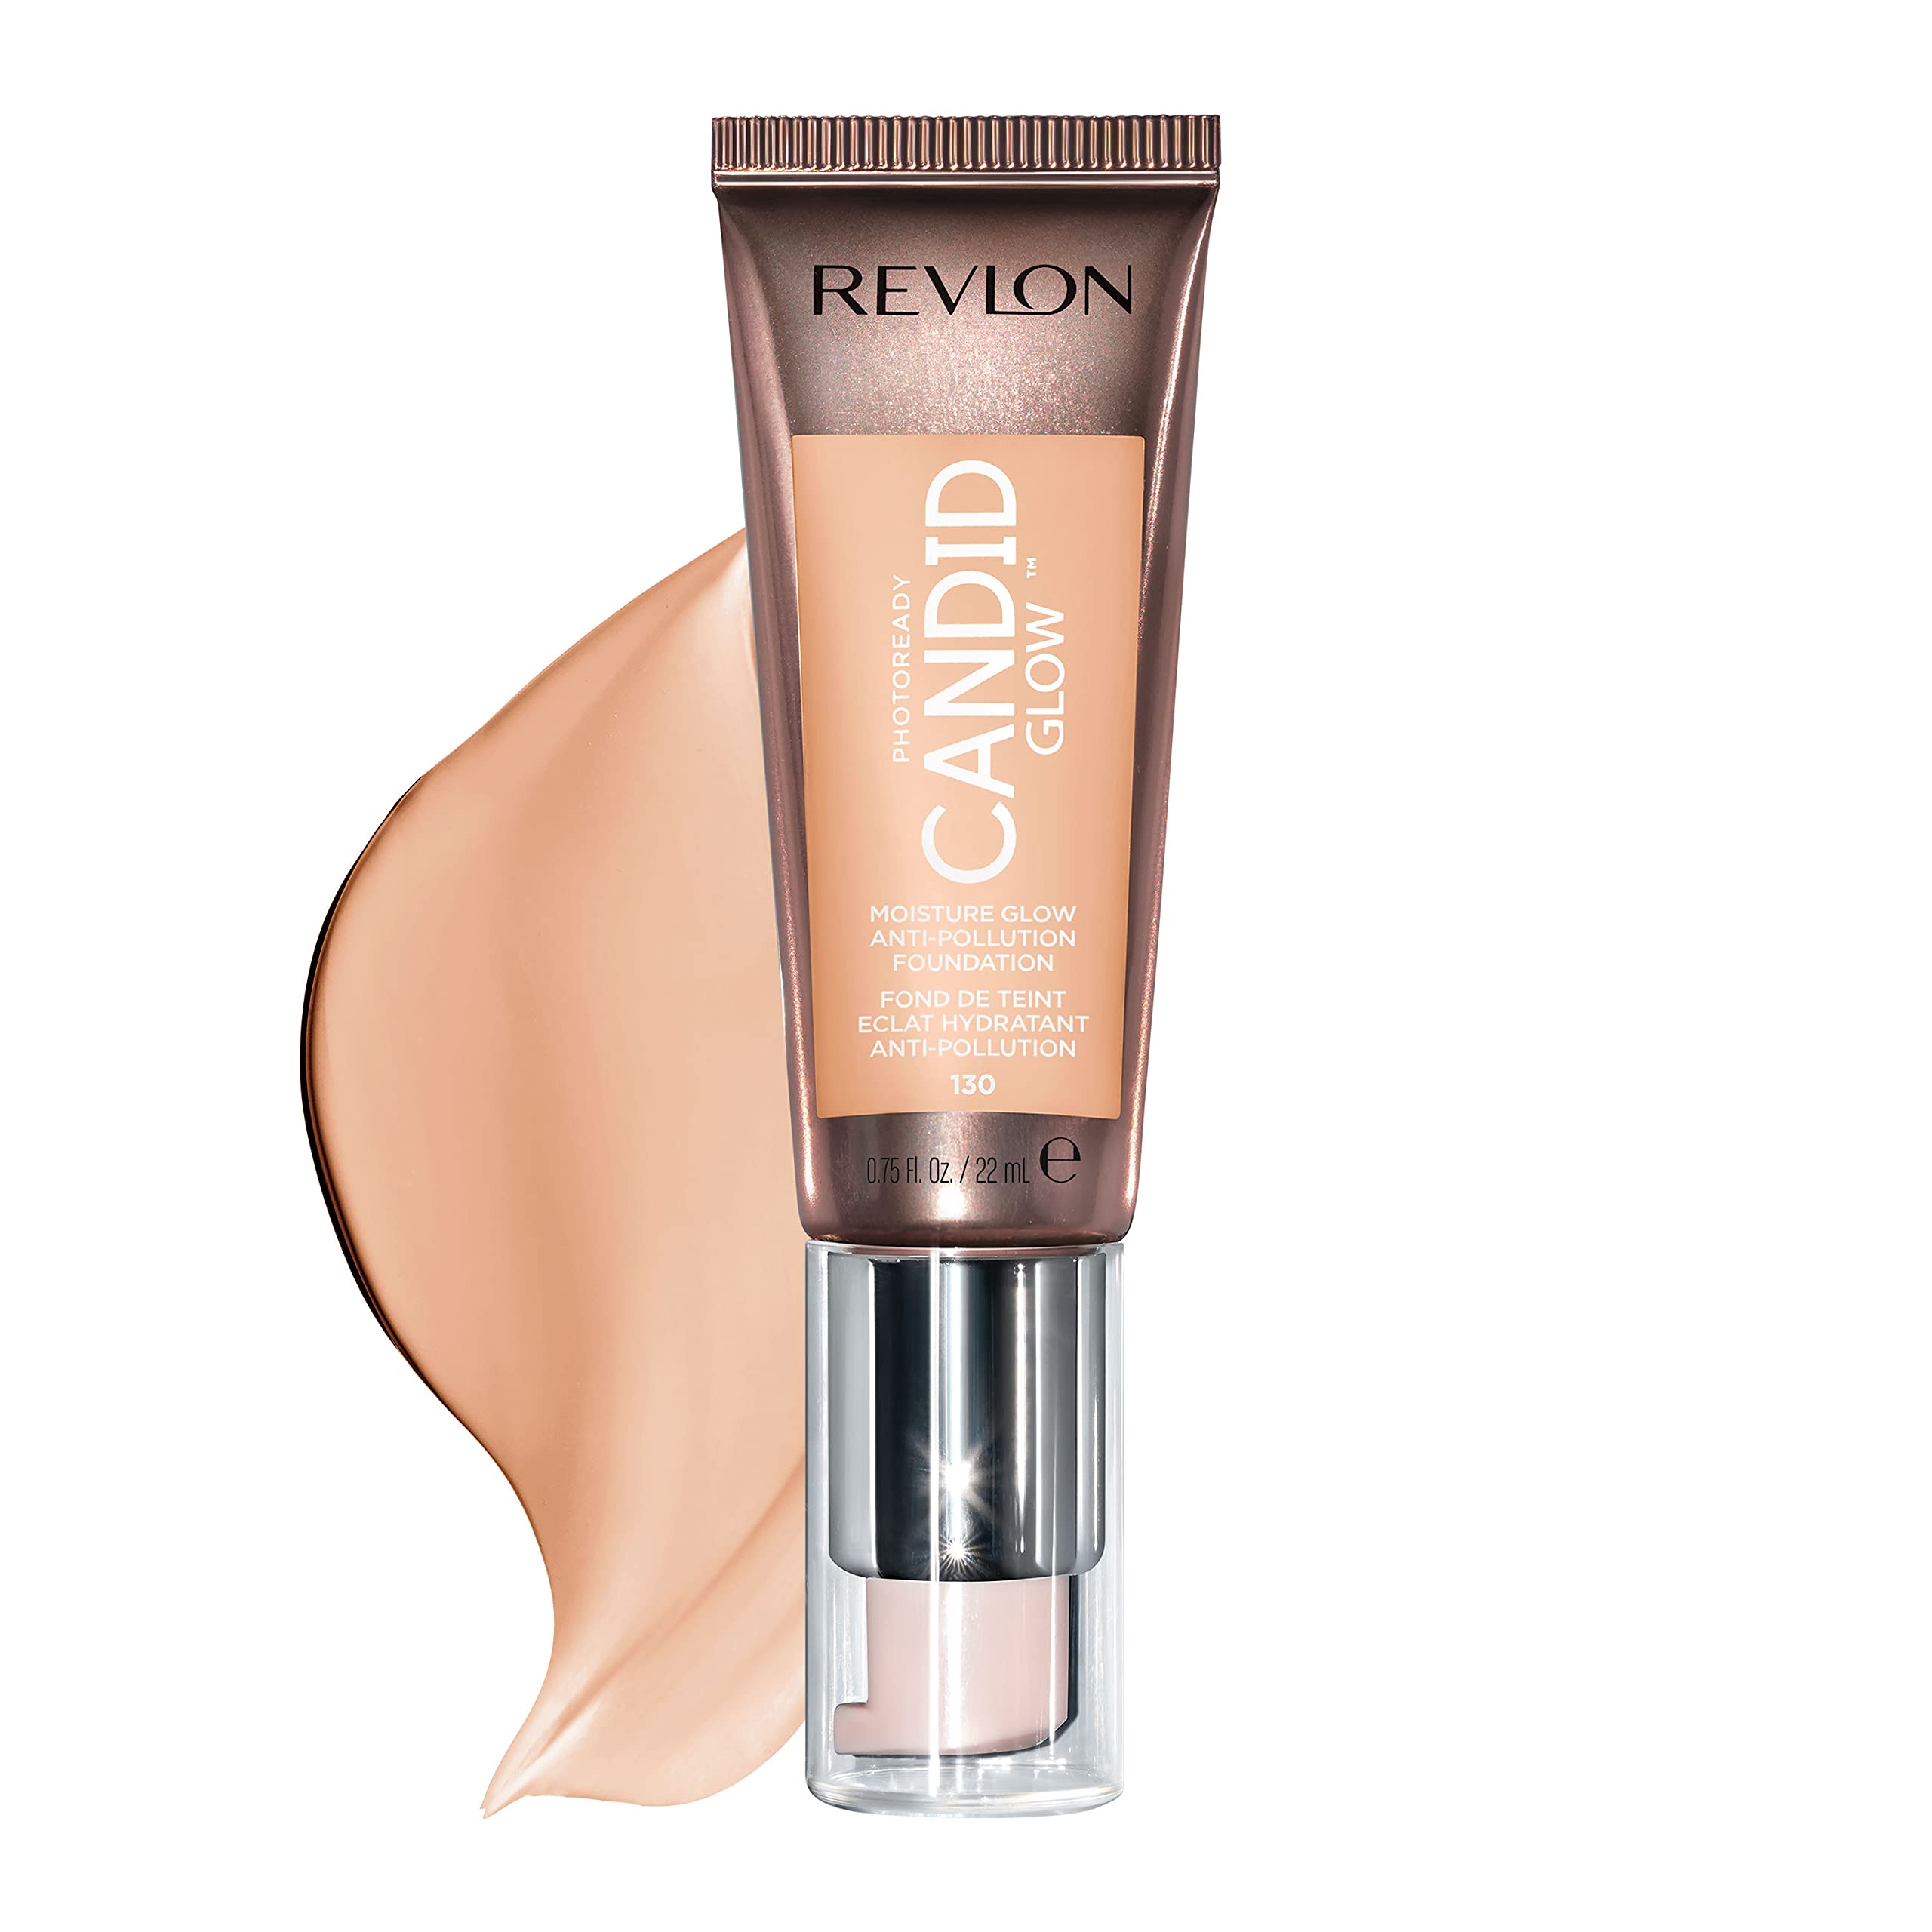 Revlon PhotoReady Candid Glow Moisture Glow Anti-Pollution Foundation with Vitamin E and Prickly Pear Oil, Anti-Blue Light Ingredients, without Parabens, Pthalates, and Fragrances, Ivory, 0.75 oz